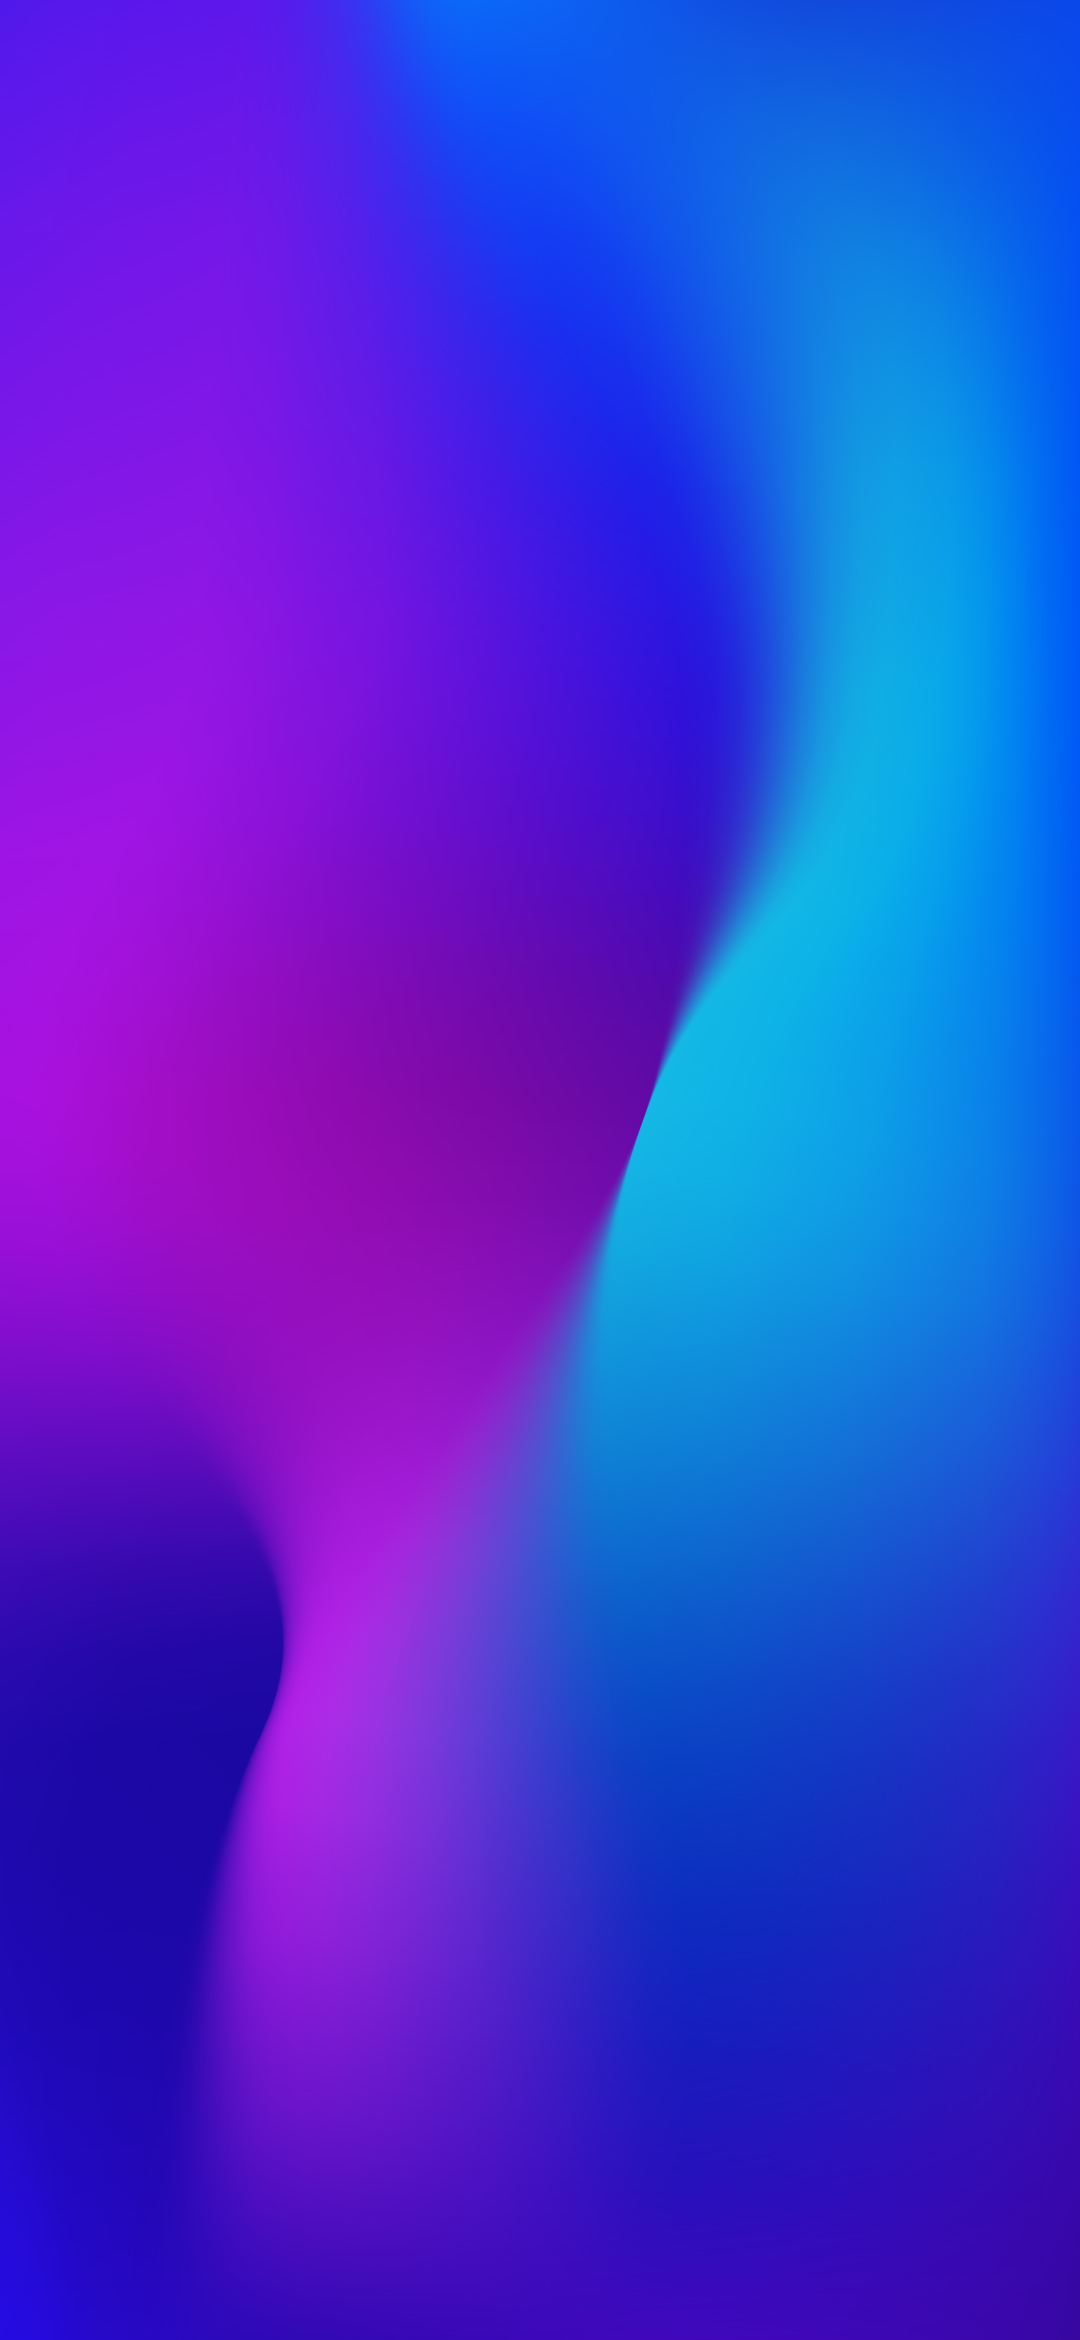 Download Oppo R17 Pro Wallpapers 11 Fhd Walls Droidviews